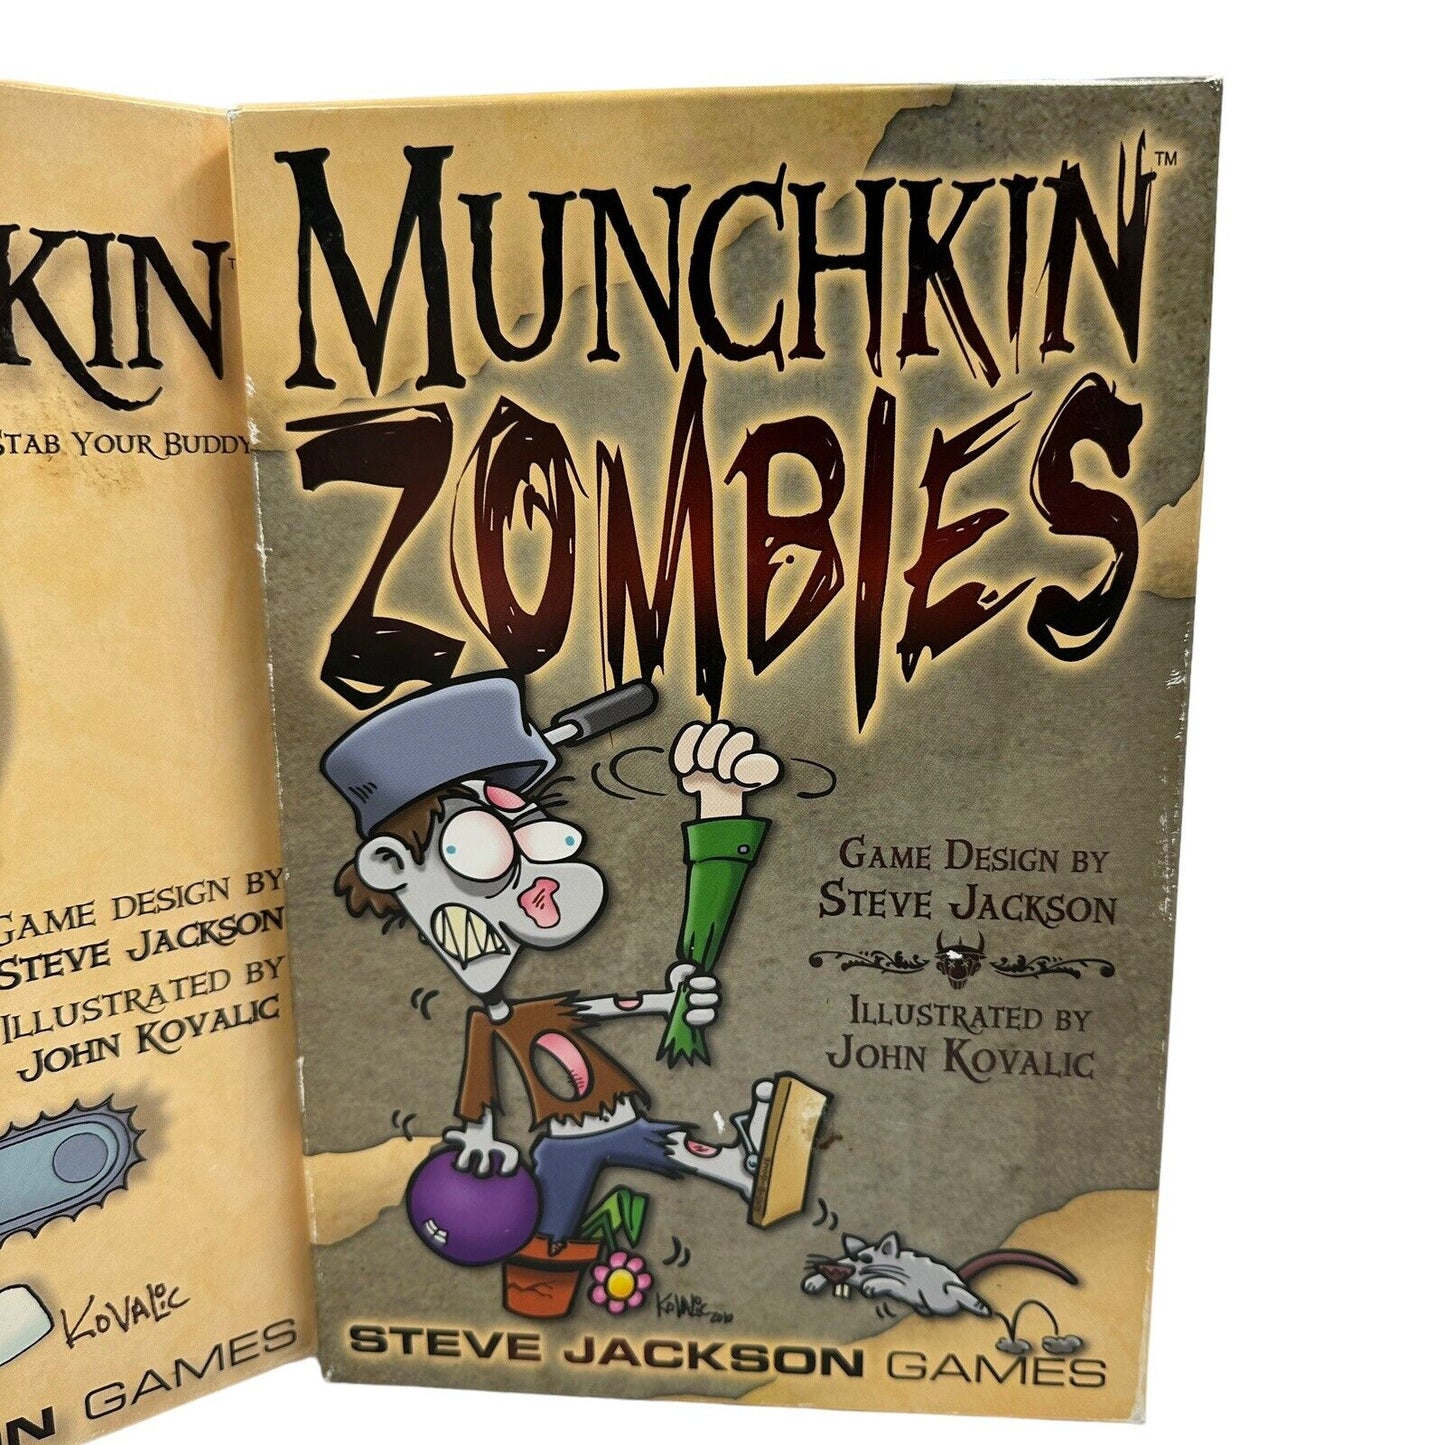 Munchkin Lot Original and Zombies Card Game Steve Jackson Games 2012 Fun Party